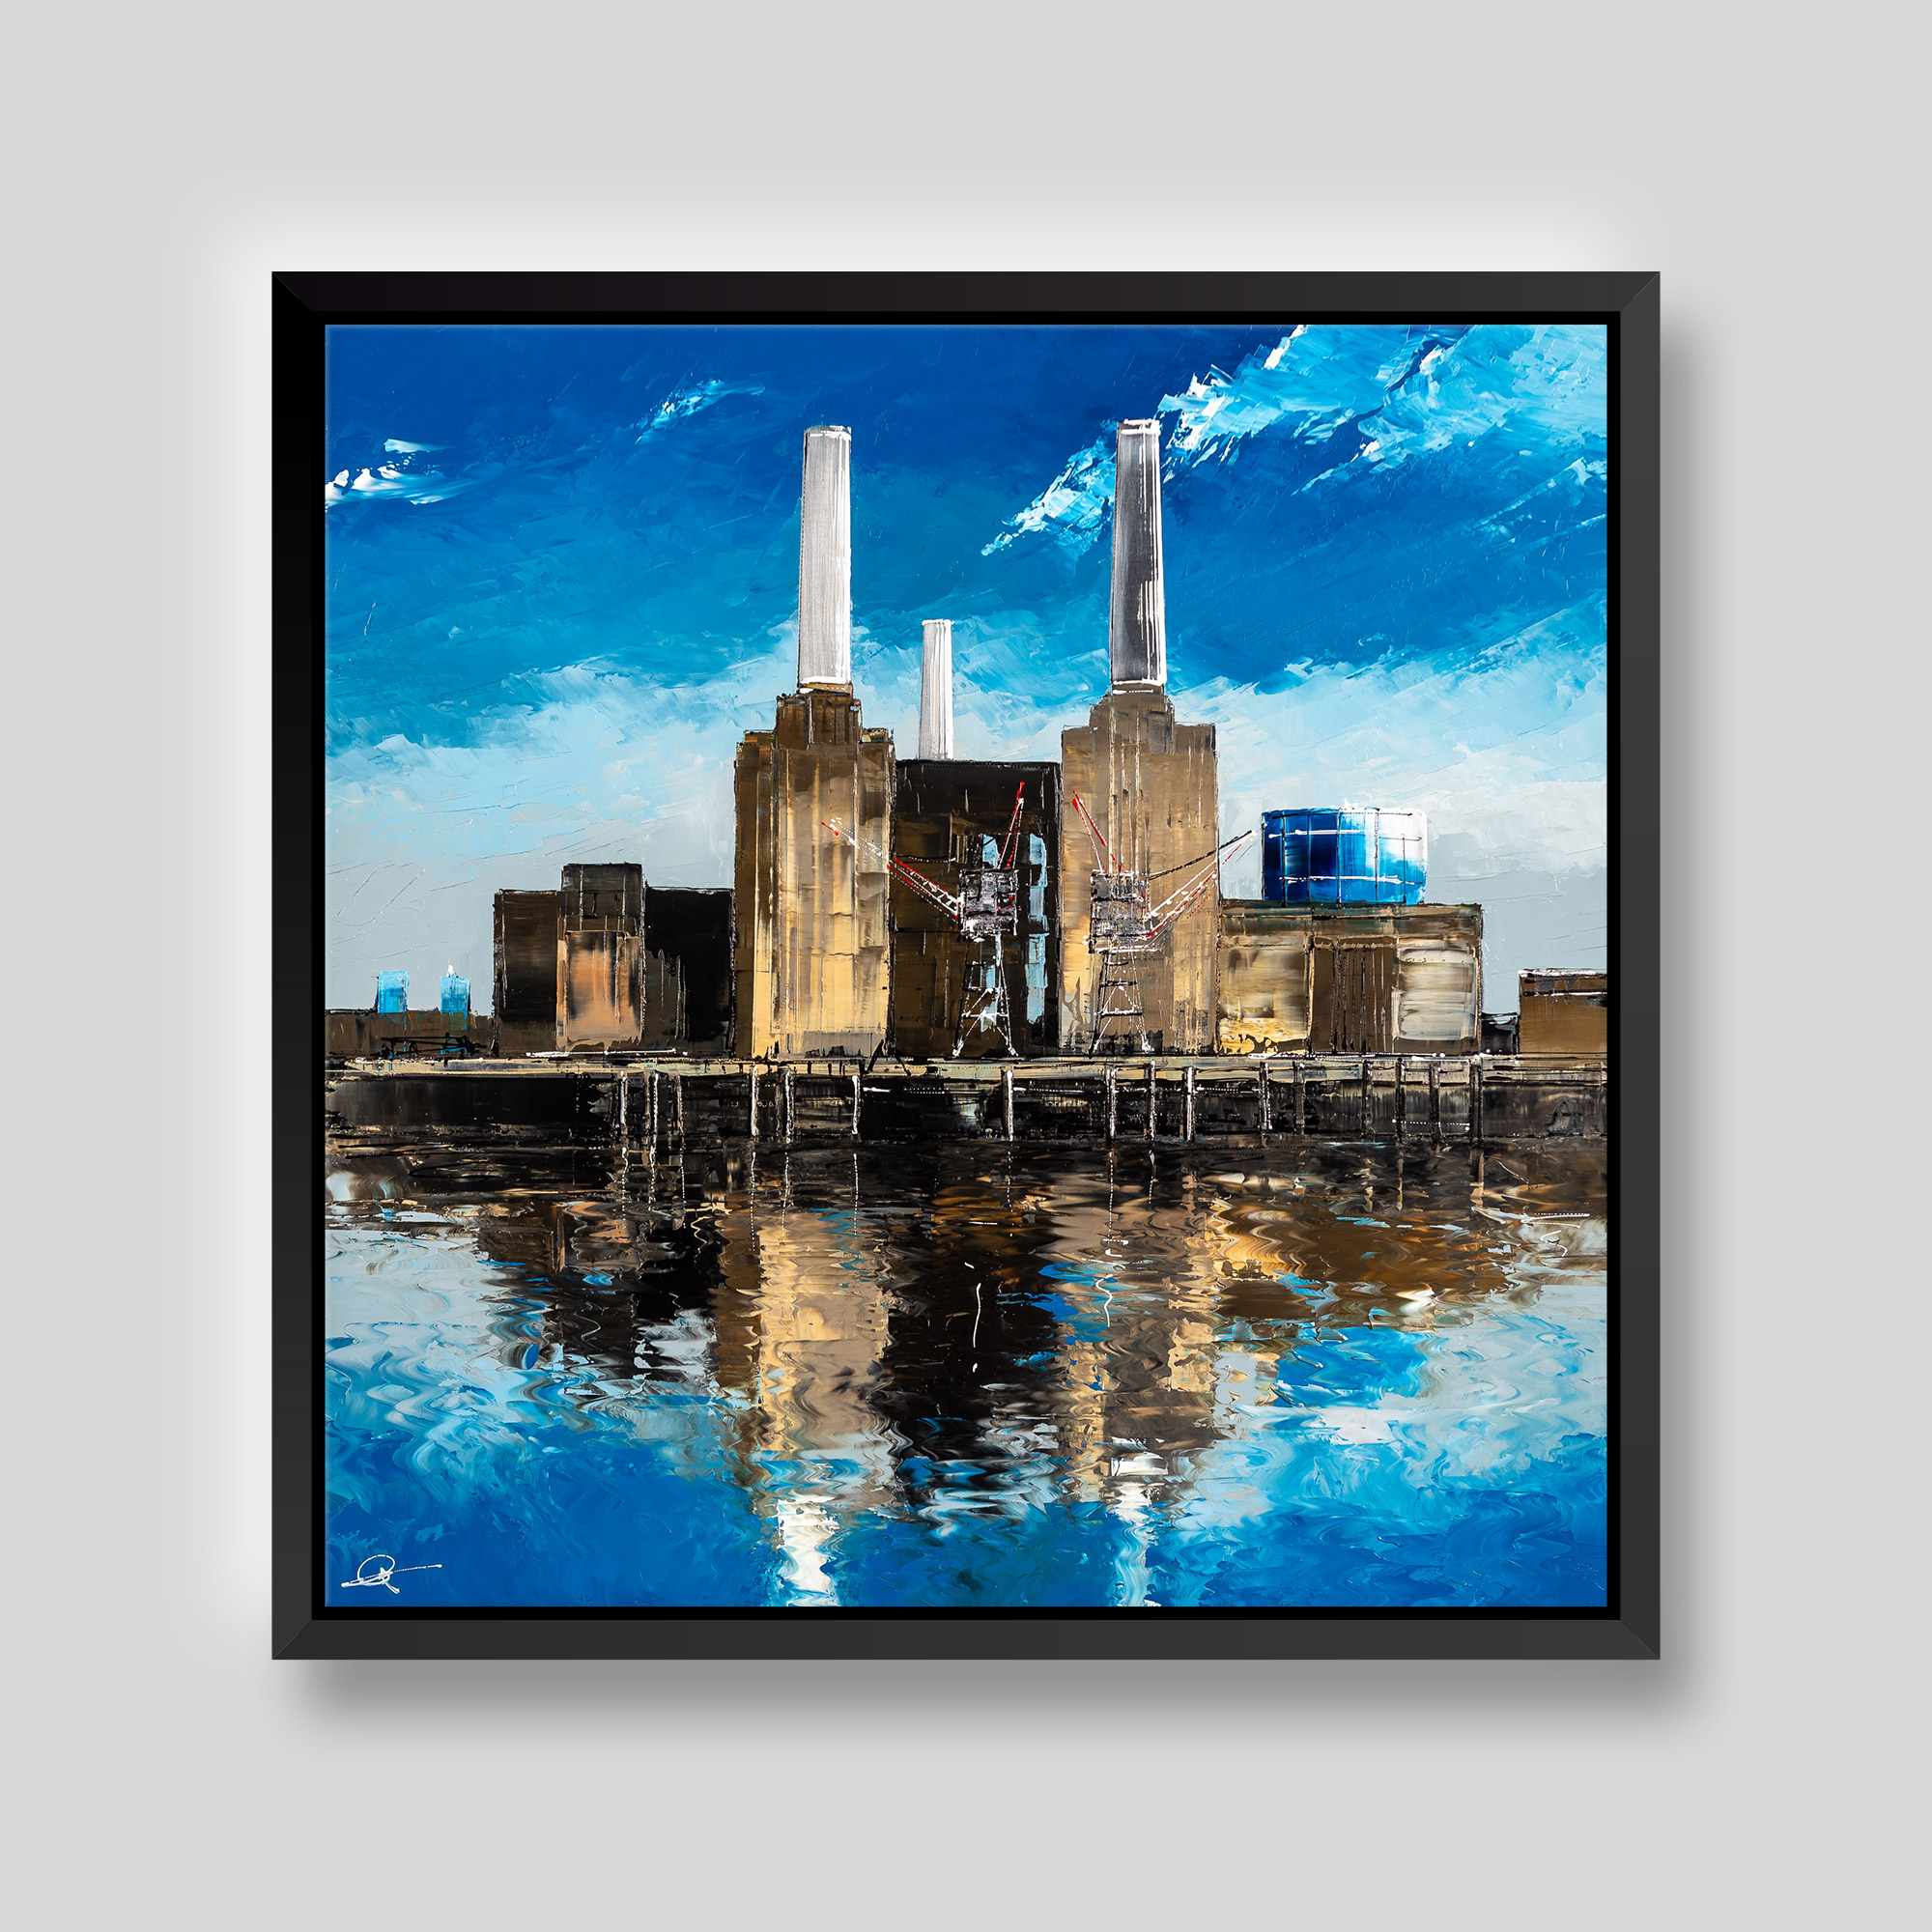 Battersea Blues by Paul Kenton, UK Contemporary Cityscape artist, an original painting of Battersea Power Station from his London Art Collection